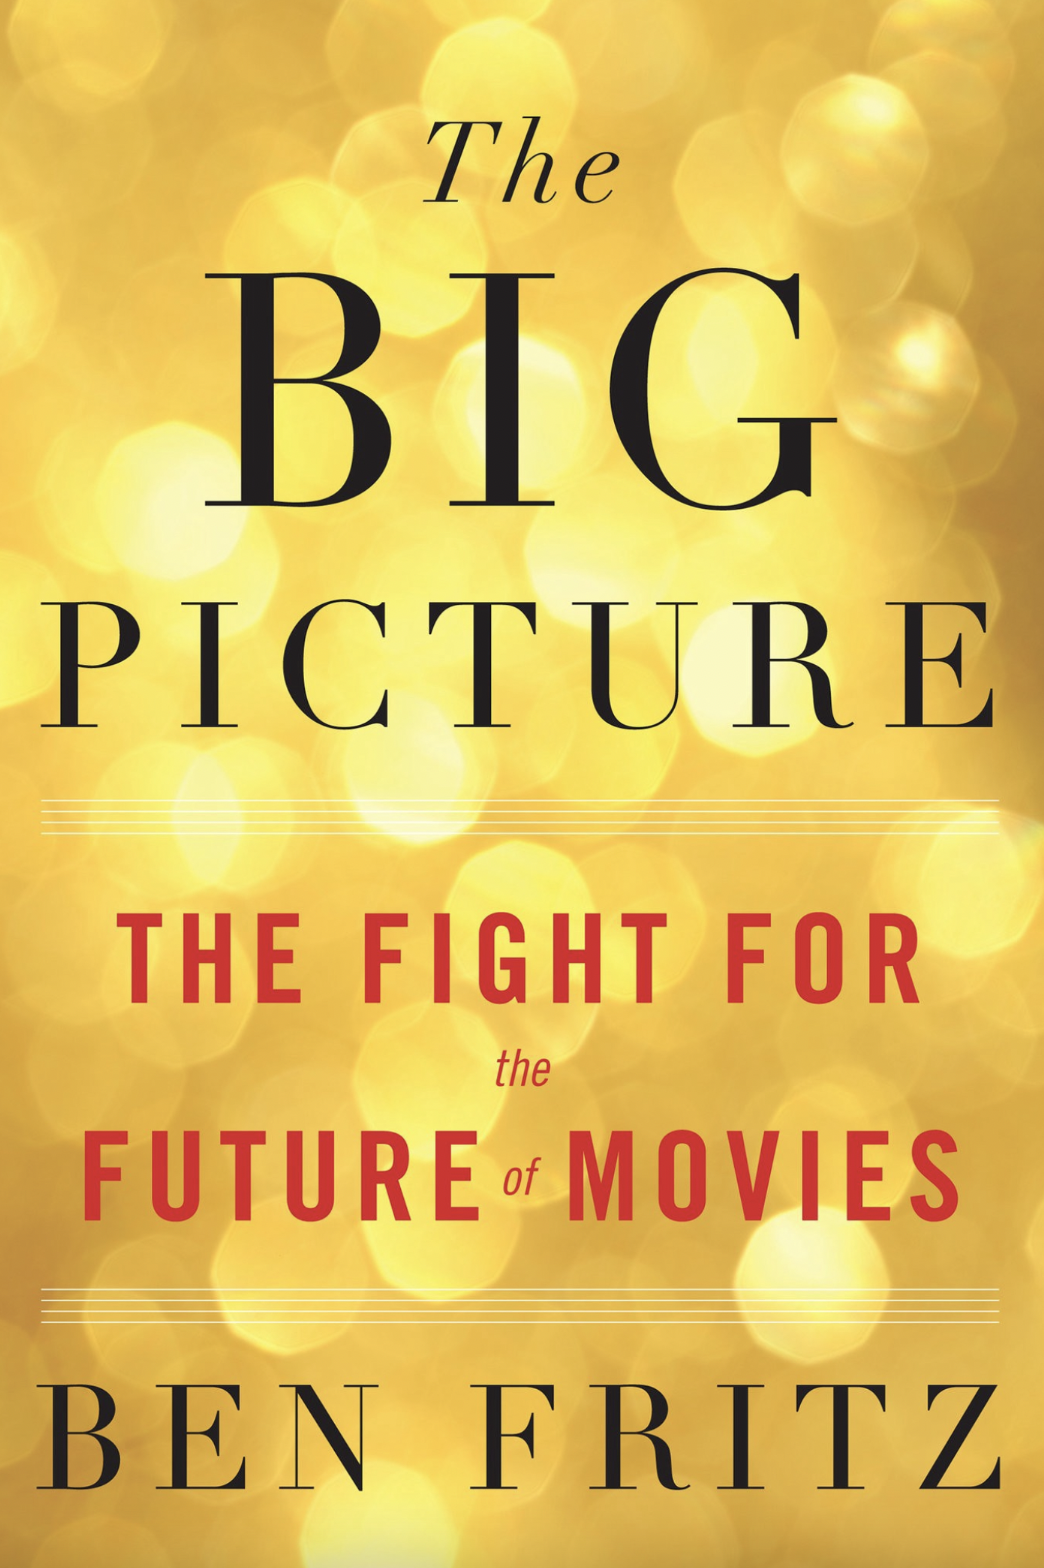 “The Big Picture: The Fight For the Future of Movies” — Book Analysis